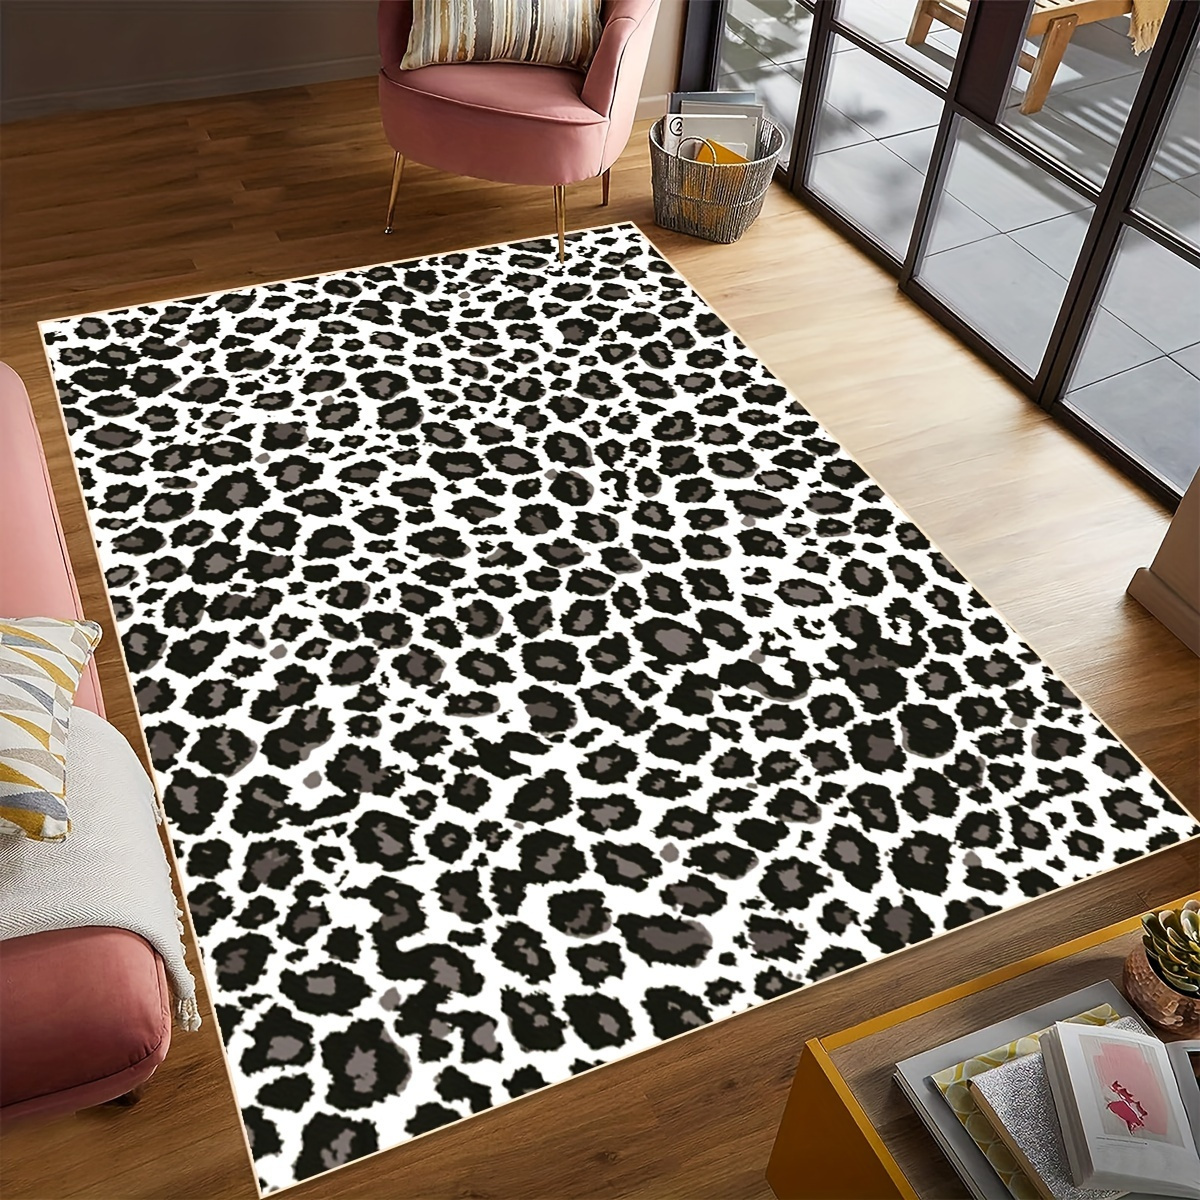 Leopard Area Rug, Animal Print Area Rug, Cute Leopard Area Rug, Black and  White Area Rug, Decorative Animal Print Area Rugs, Home Gifts -  Norway